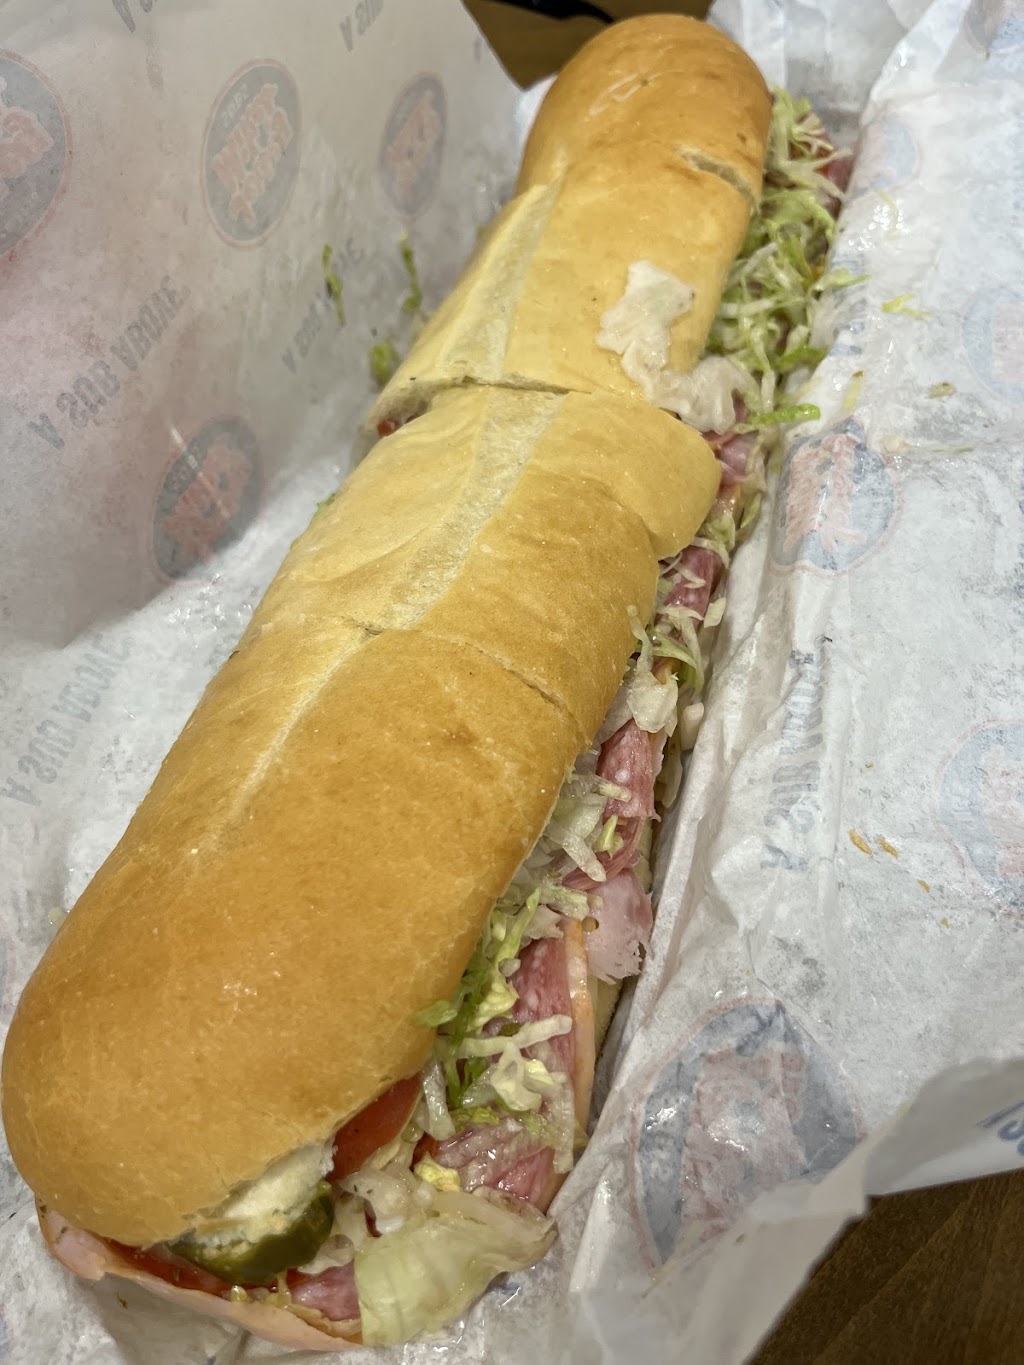 Jersey Mikes Subs | 169 Danbury Rd Suite 103, New Milford, CT 06776 | Phone: (860) 799-7233